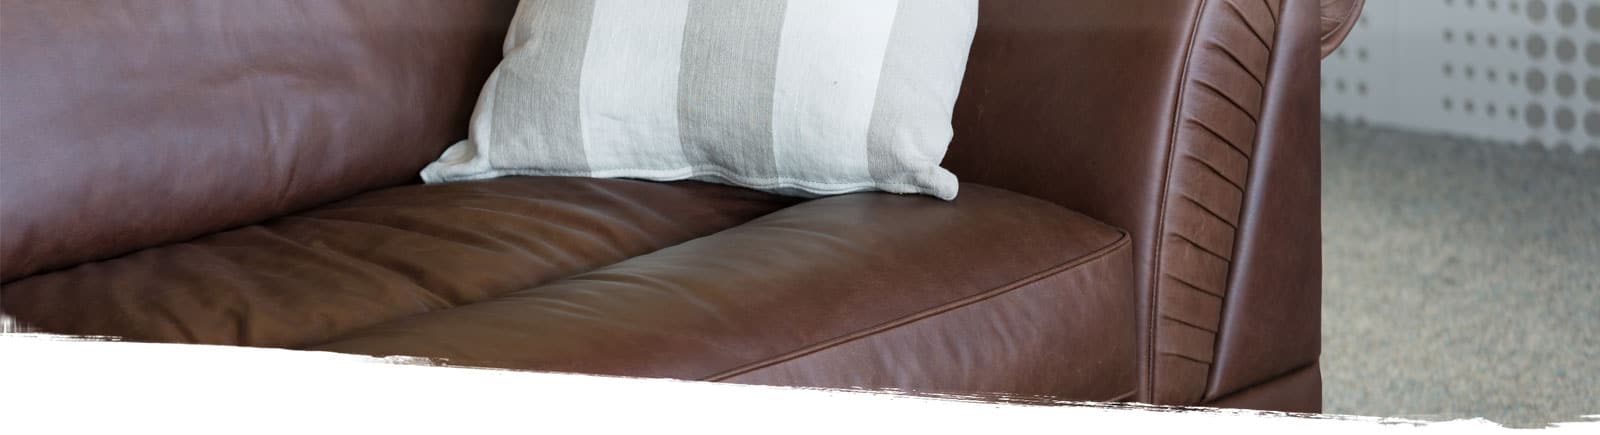 Affordable Leather Furniture Cleaning Service